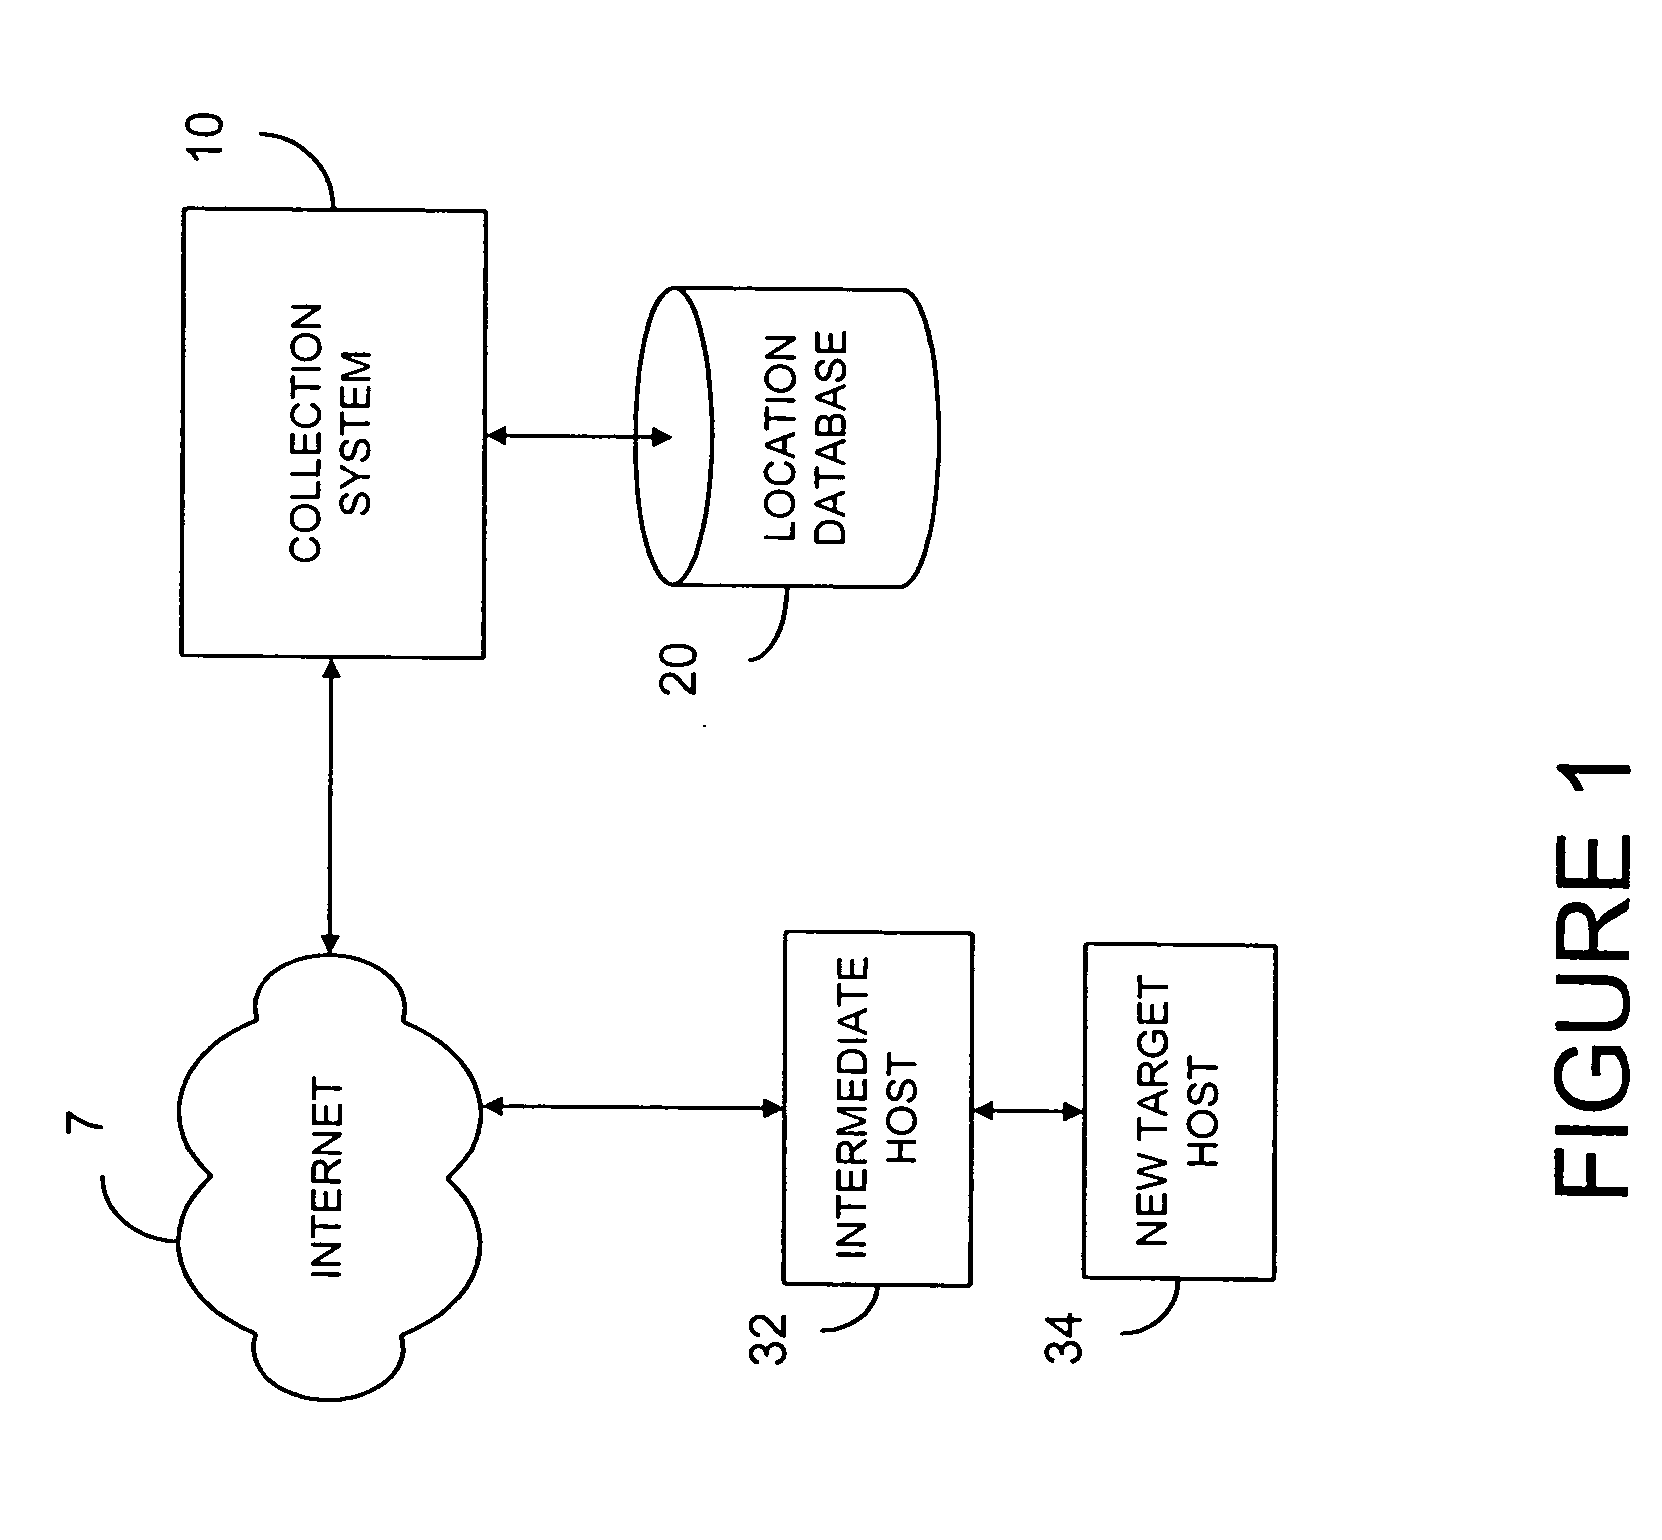 Systems and methods for determining, collecting, and using geographic locations of Internet users